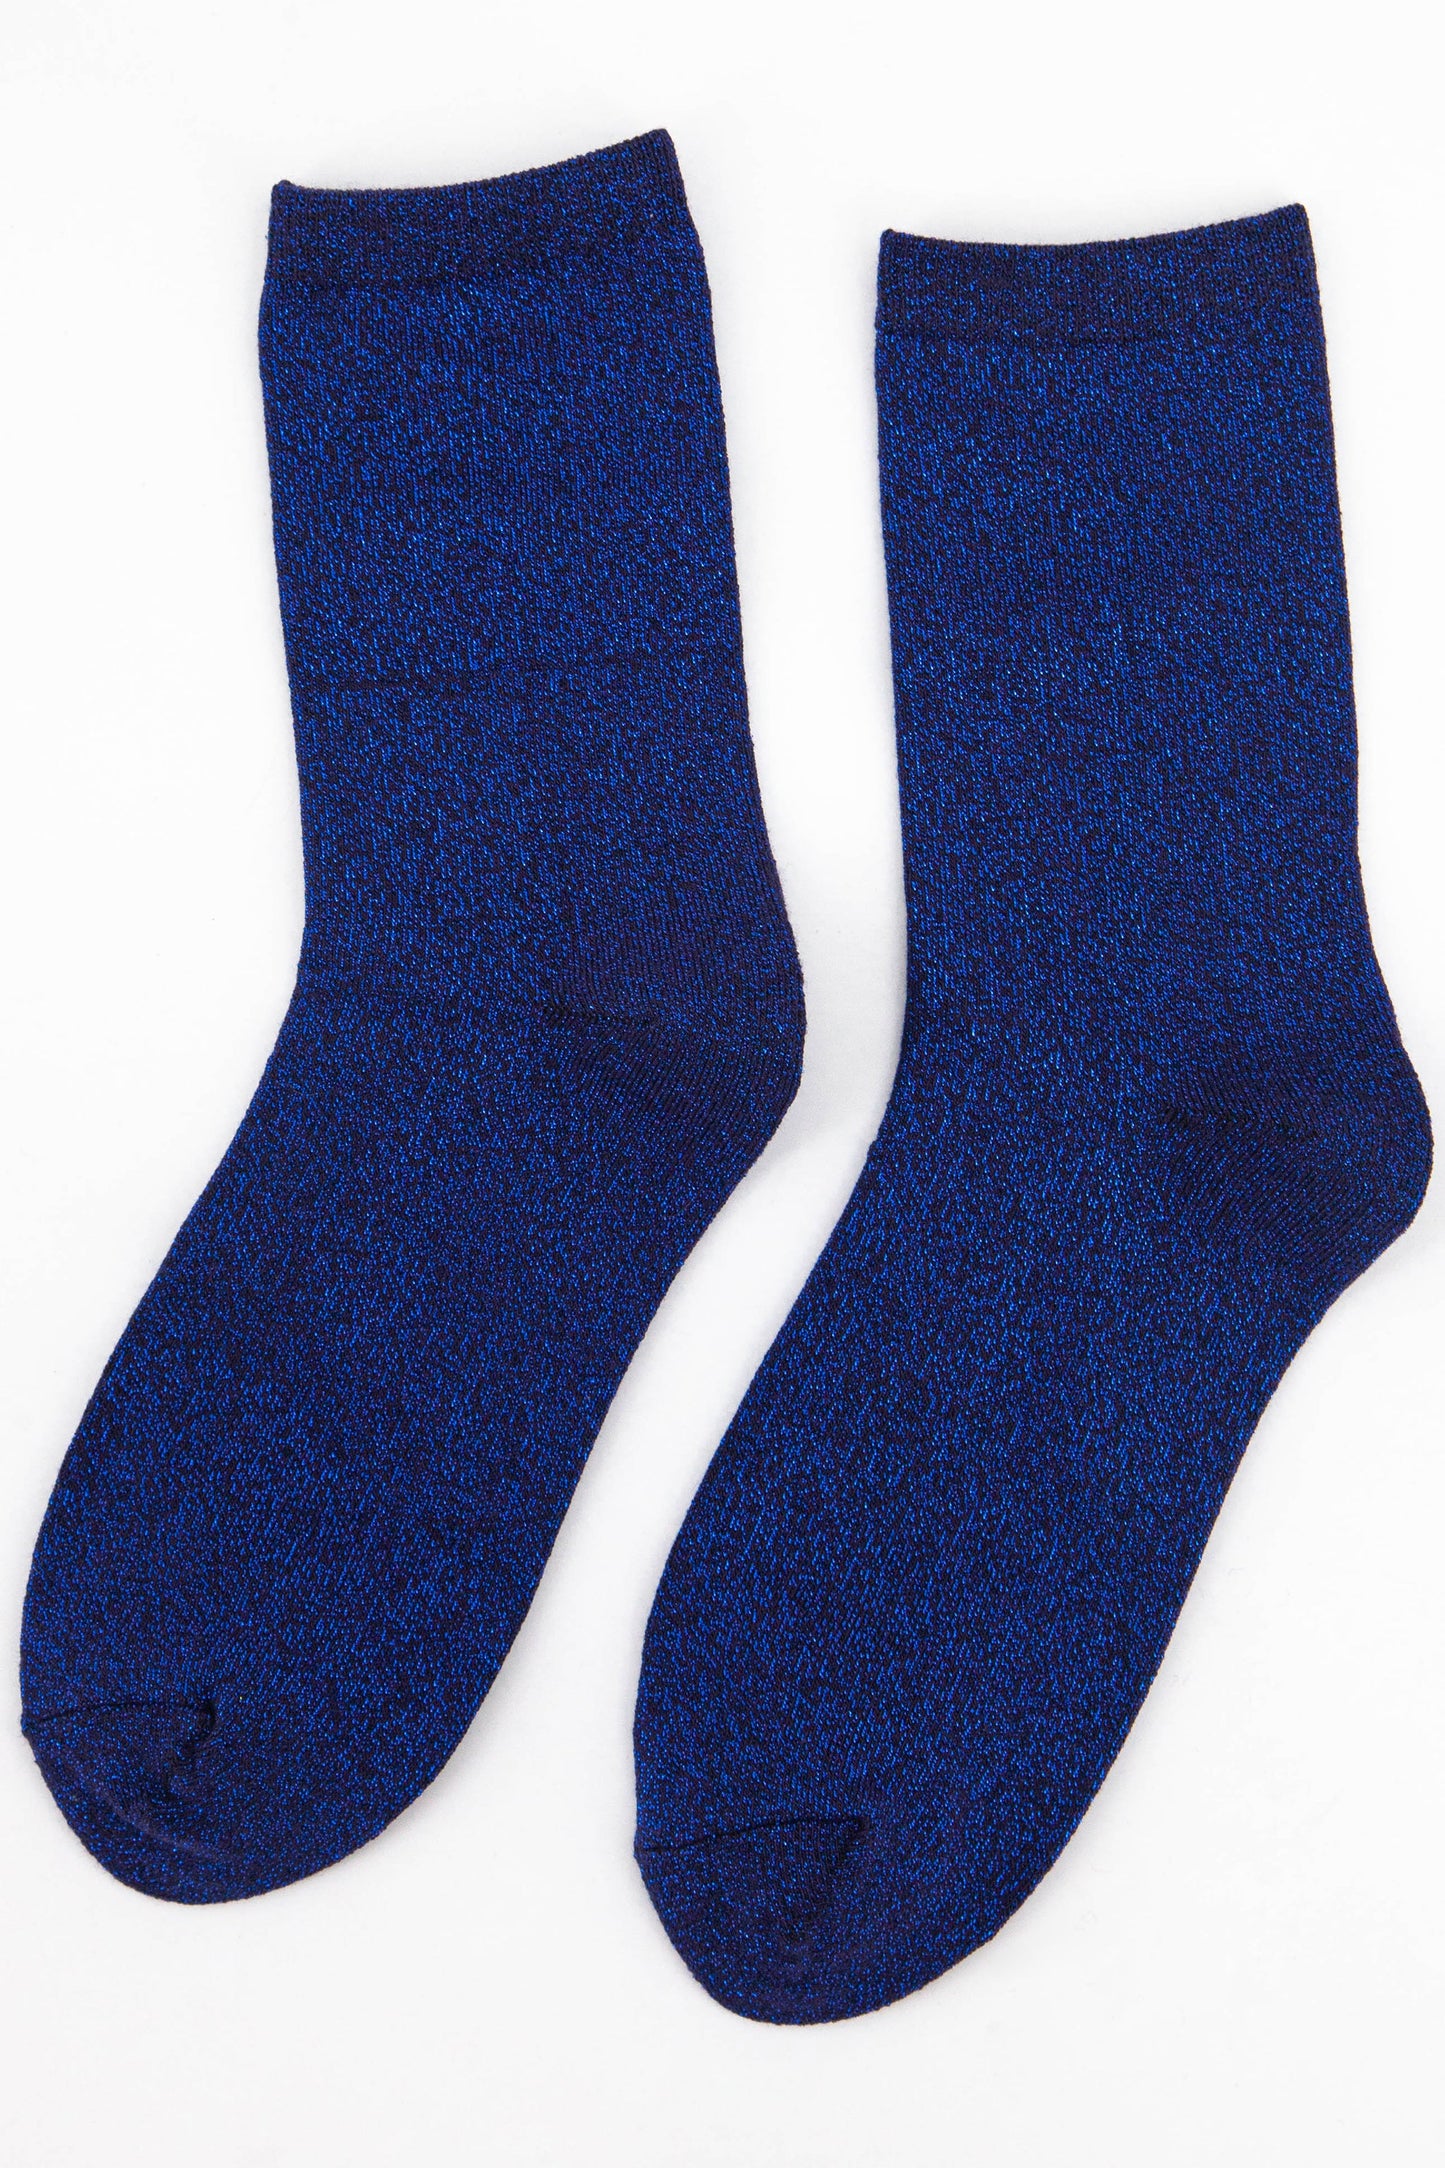 midnight blue cotton ankle socks with an all over sparkly glitter effect